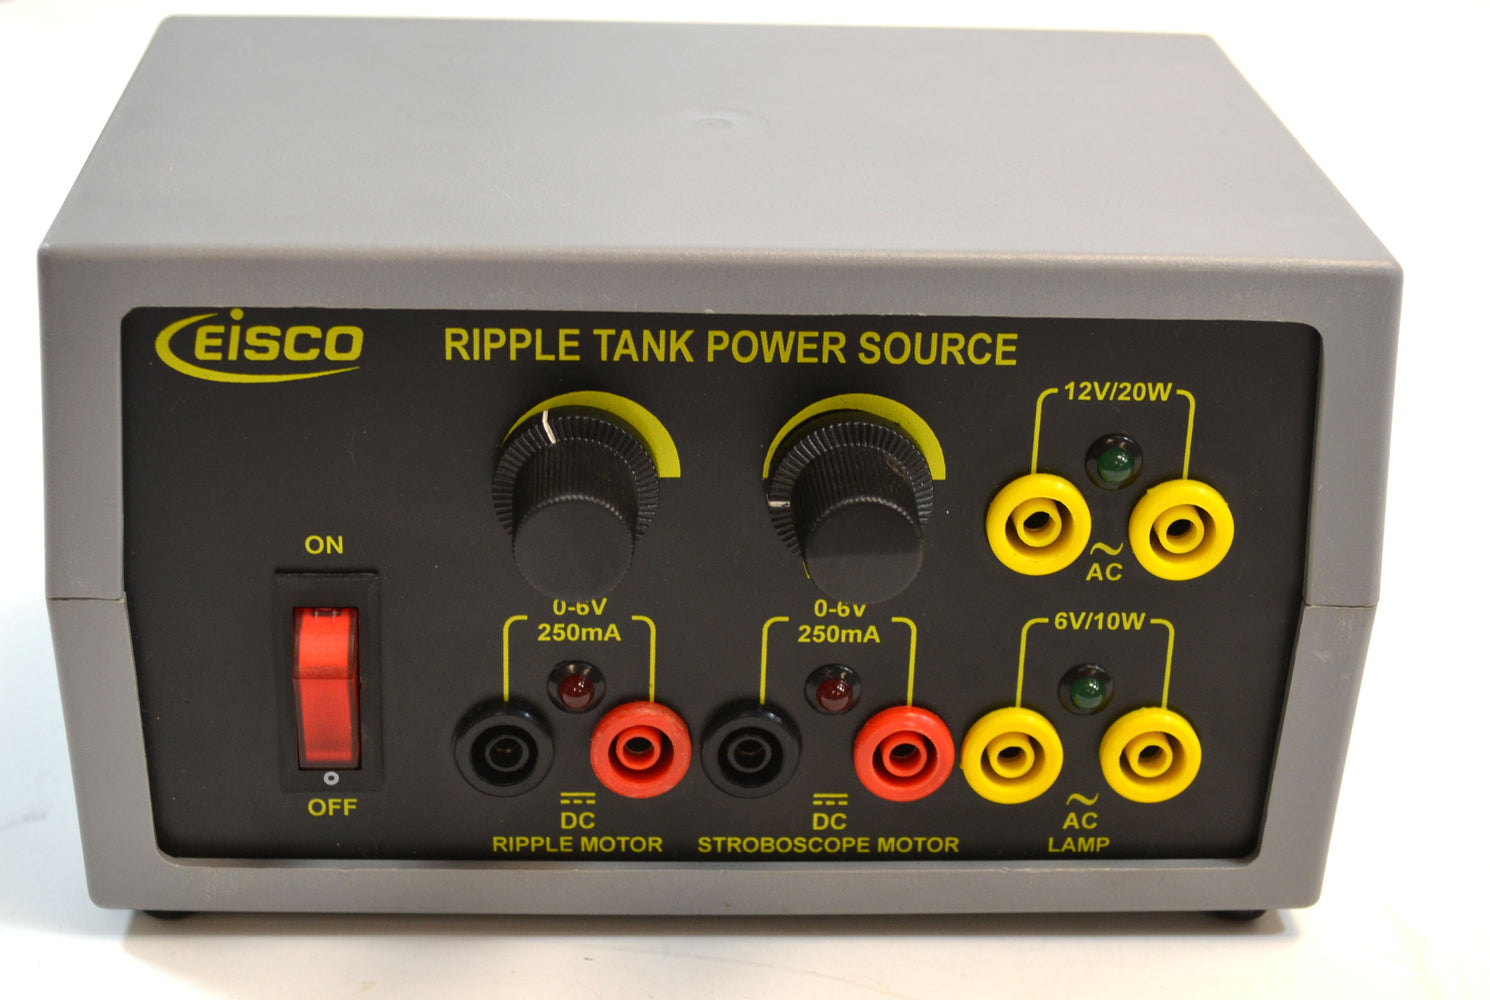 AC/DC Power Supply Controller for Eisco Ripple Tank PH0767A - 2 Variable DC Outputs 0-6V, 2 Fixed AC Outputs 6V/10W & 12V/20W